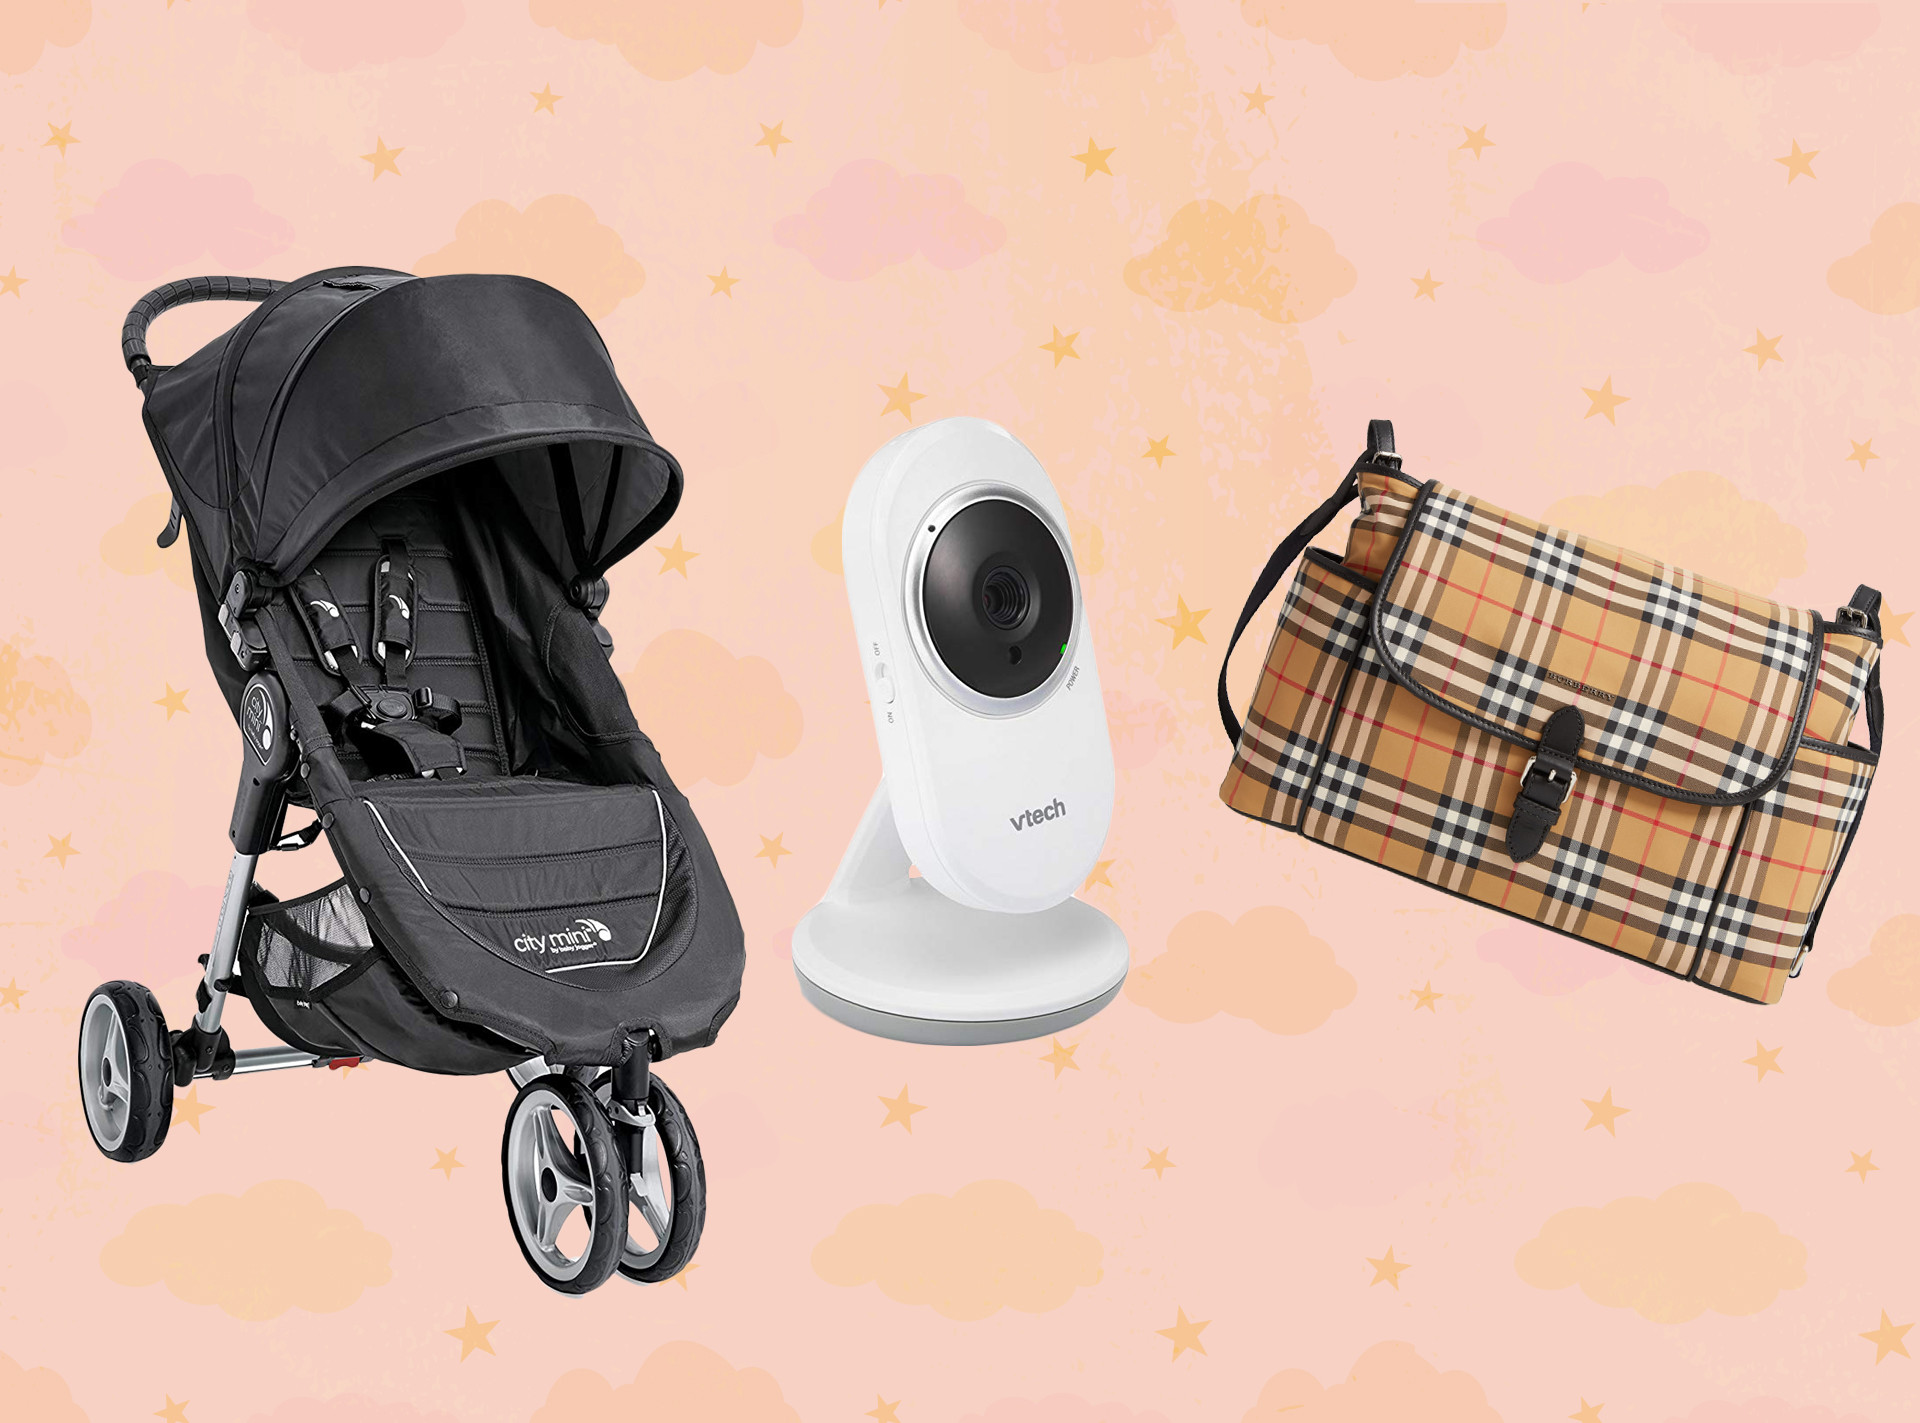 E-Comm: Best Baby Shower Gifts According to Hip Moms